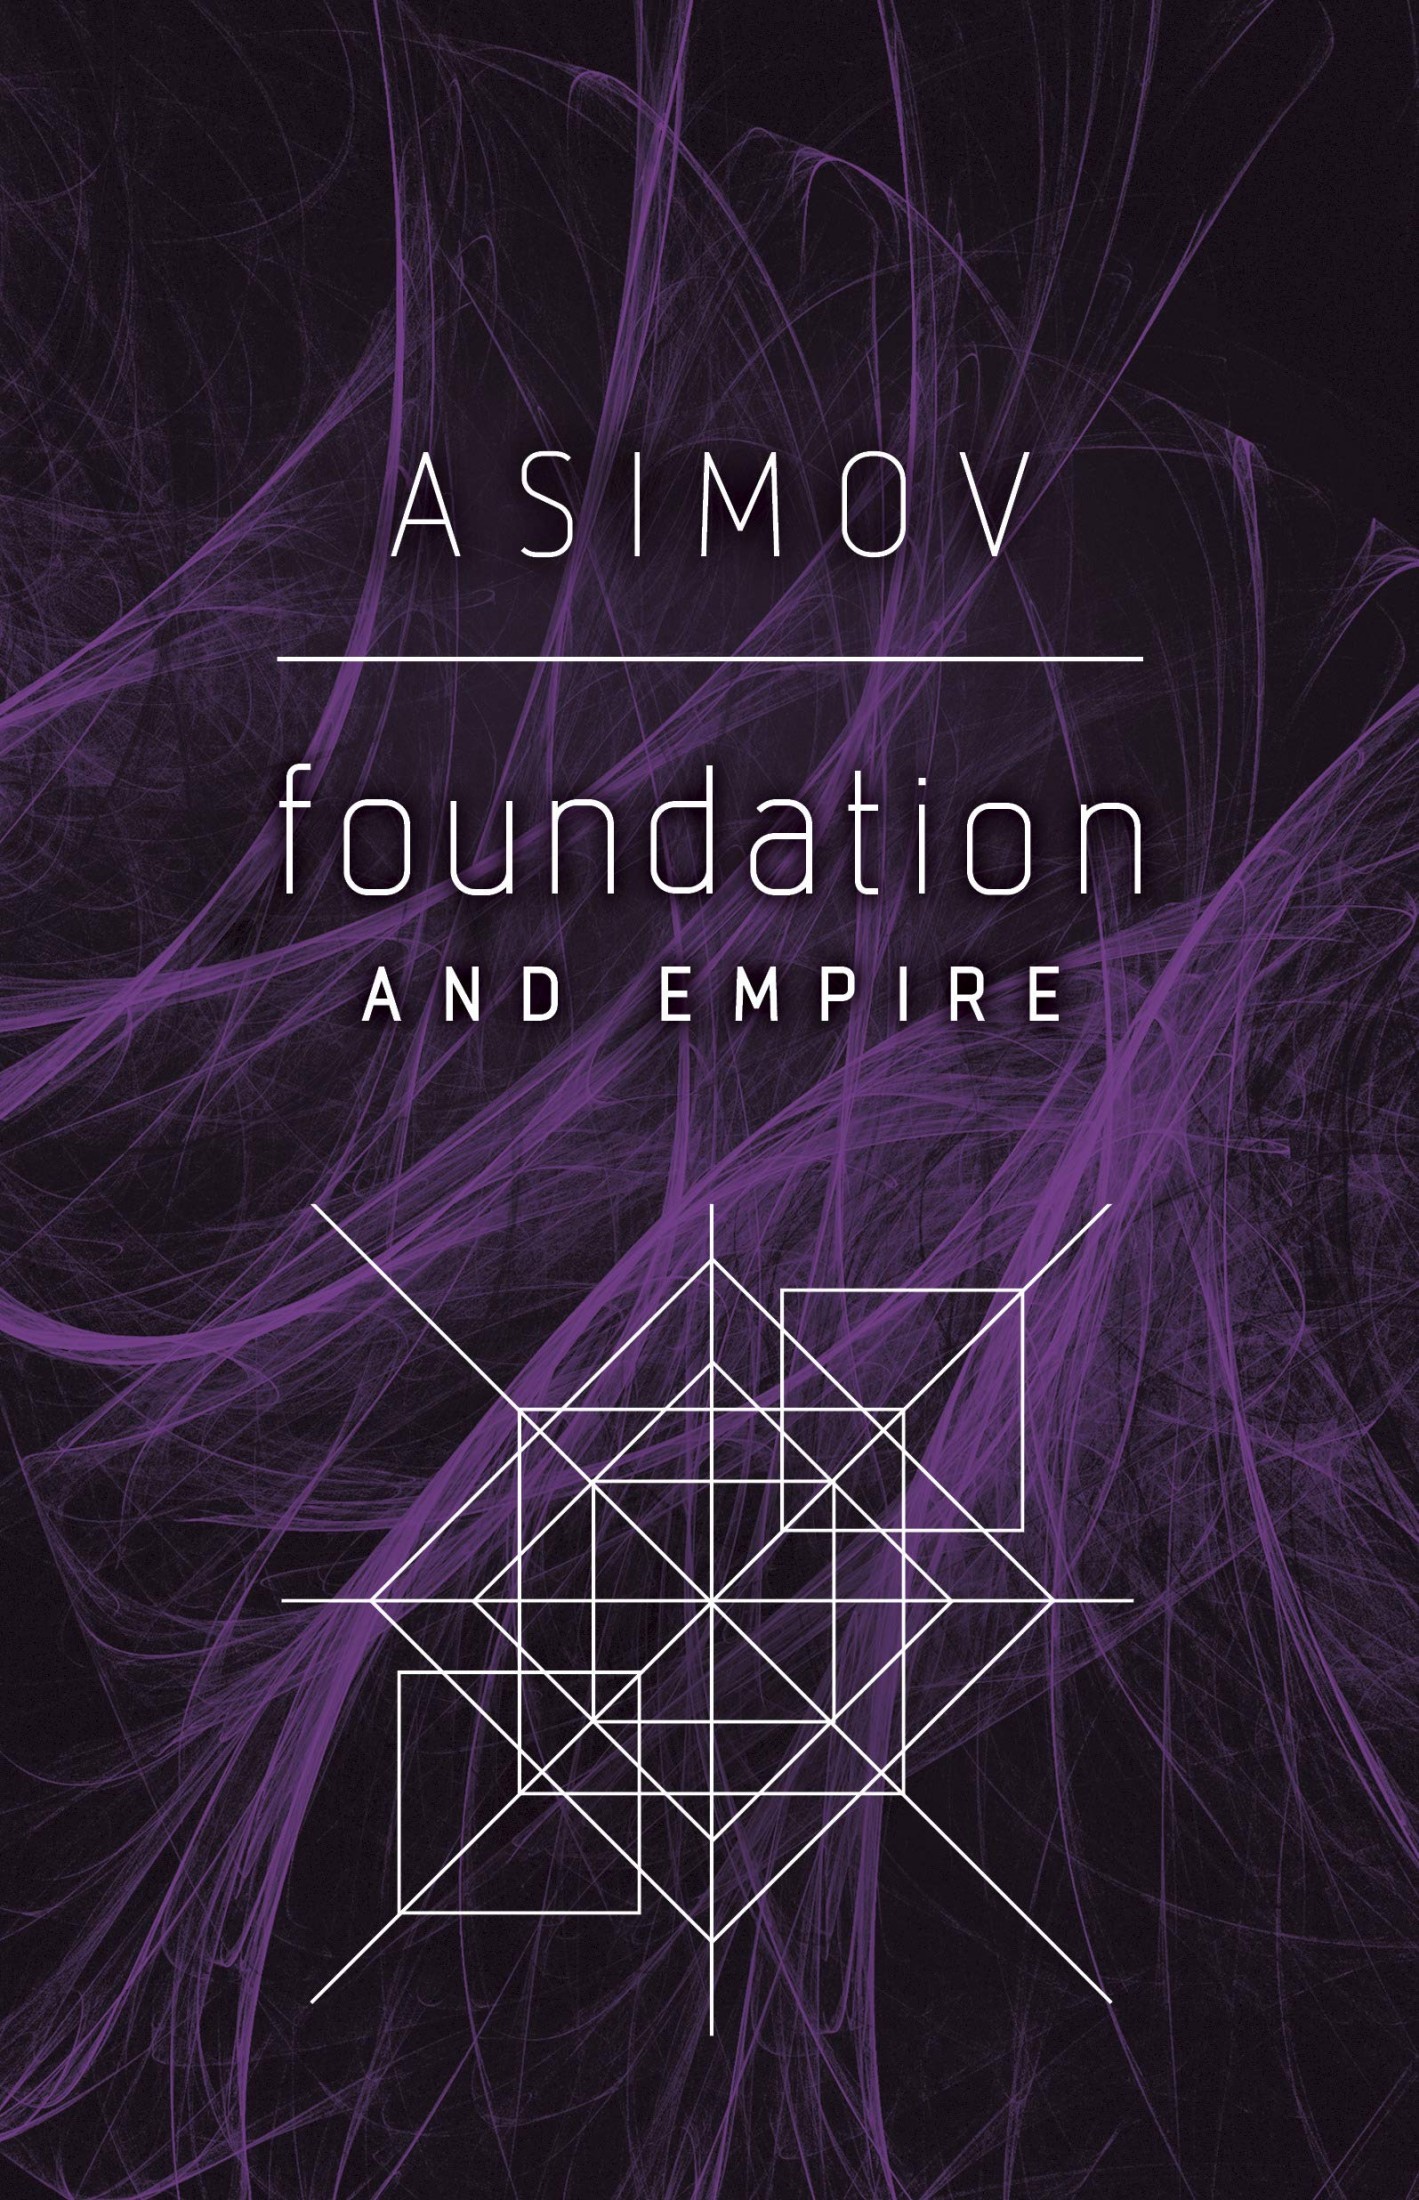 Foundation and Empire Isaac Asimov Book Cover